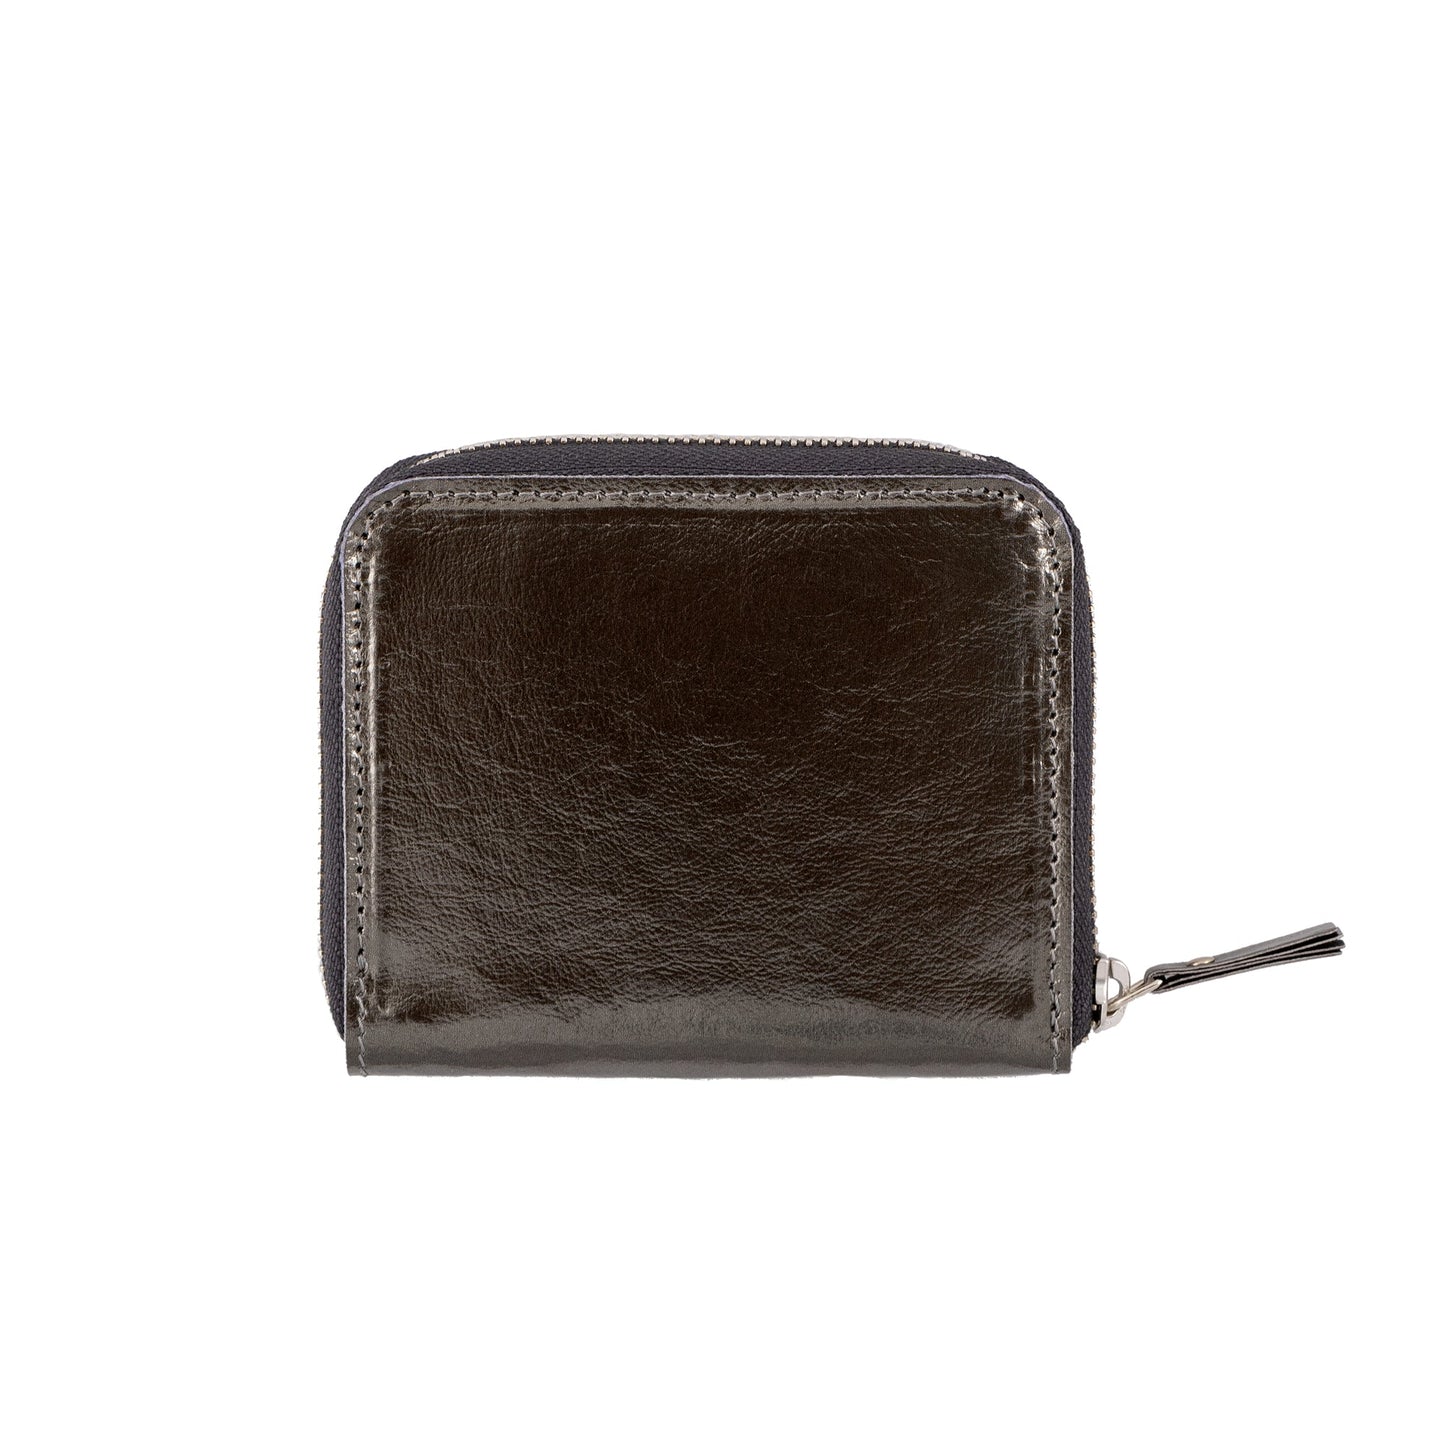 The outside of a small zippered washable paper wallet is shown. The image also shows a silver zip and washable paper zip pull. The wallet shown is dark grey metallic.